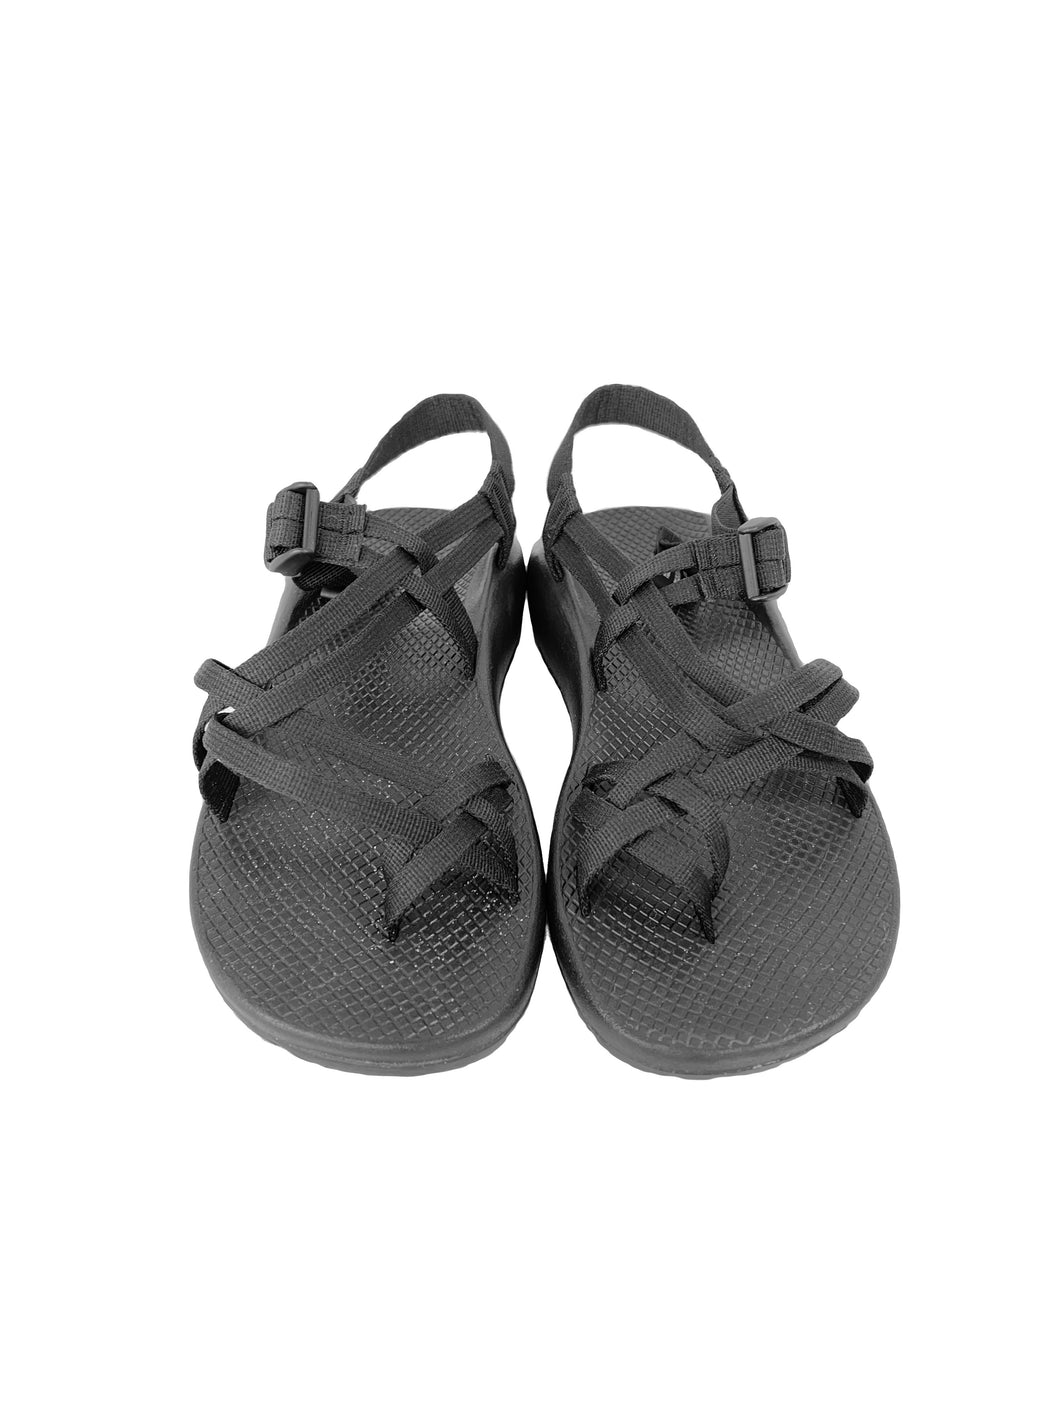 Chaco black sandals size 10